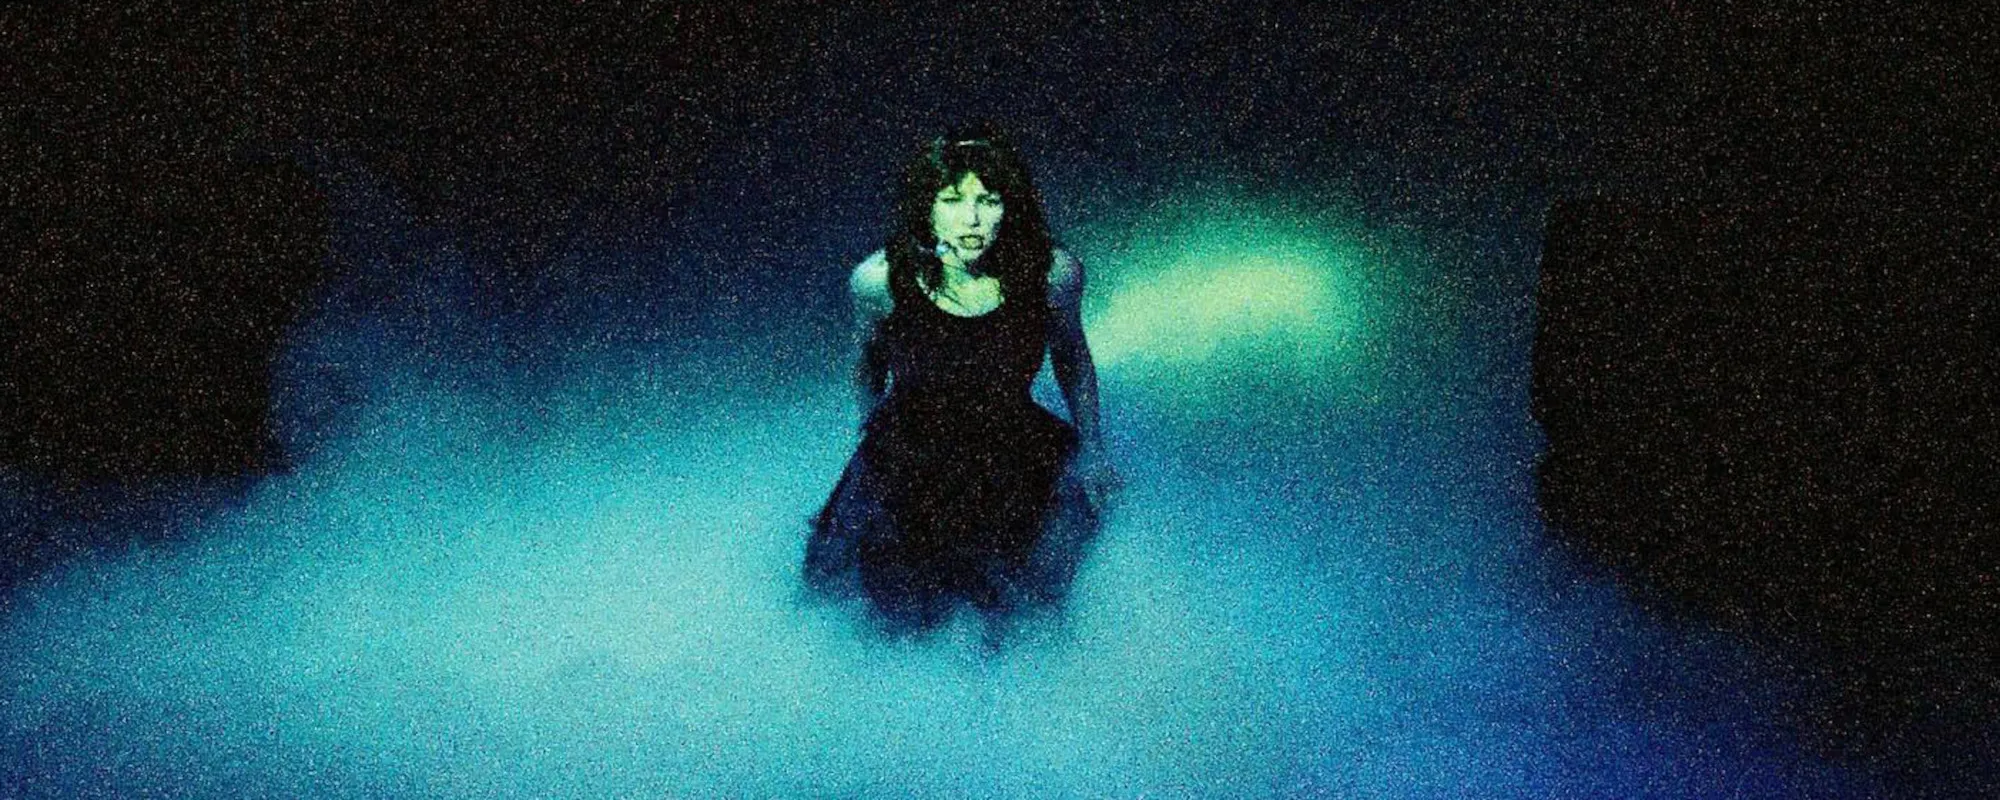 The Meaning Behind Kate Bush's 1985 Classic 